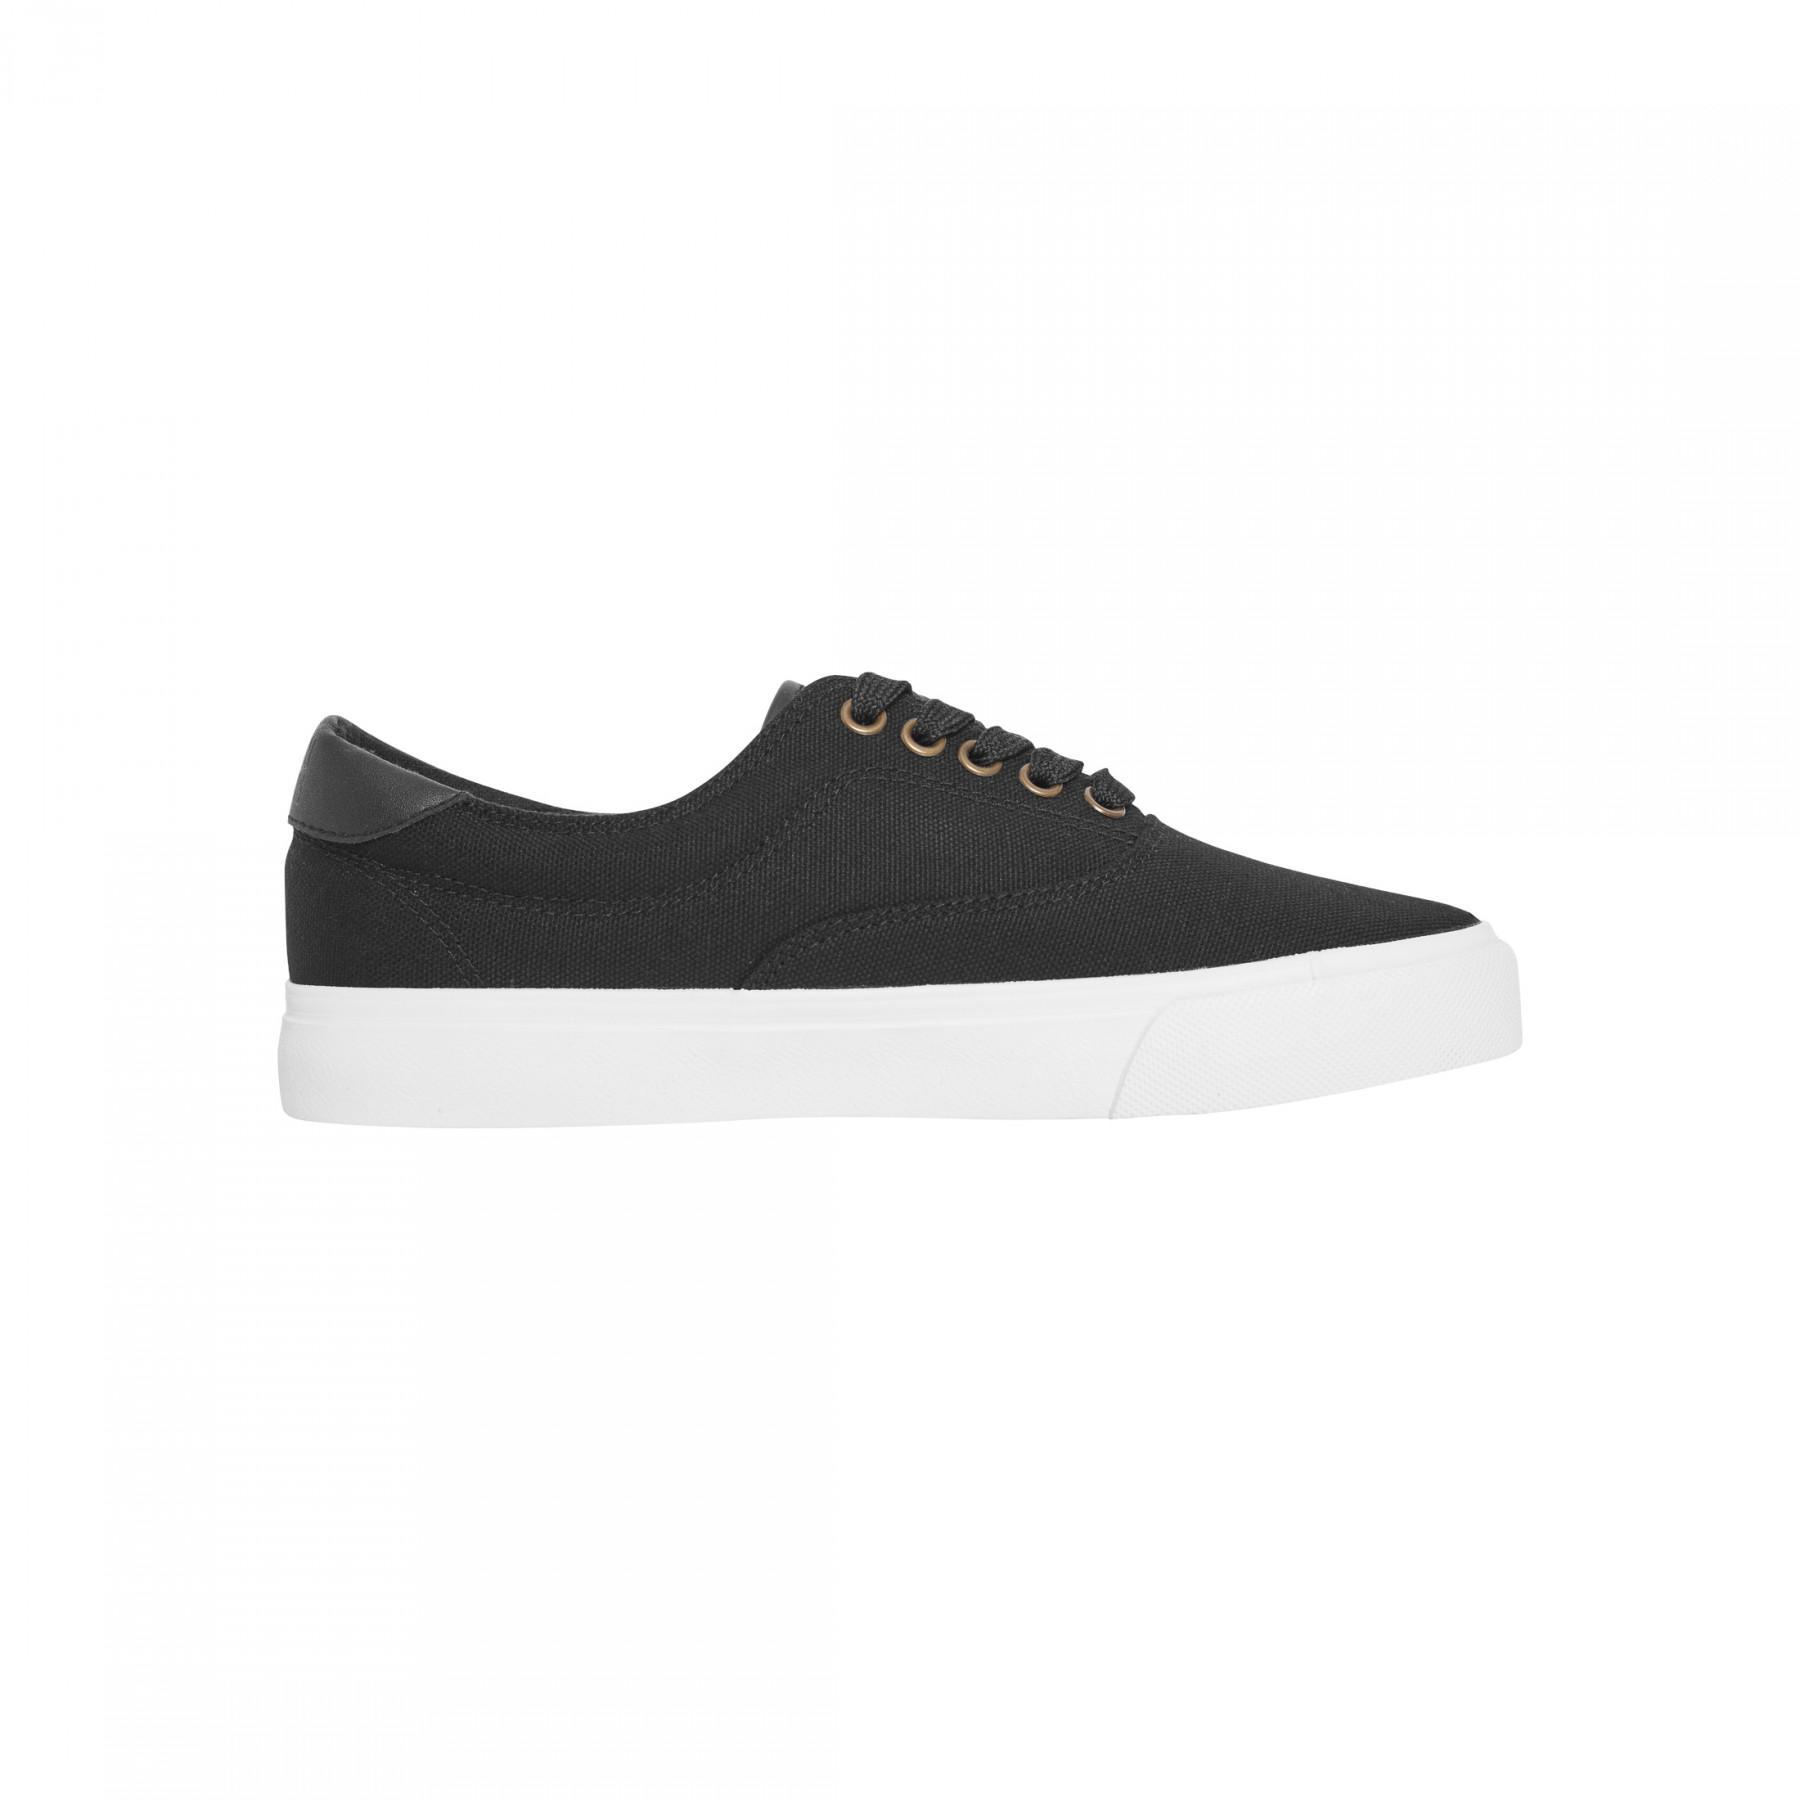 Urban Classic low with lace sneakers